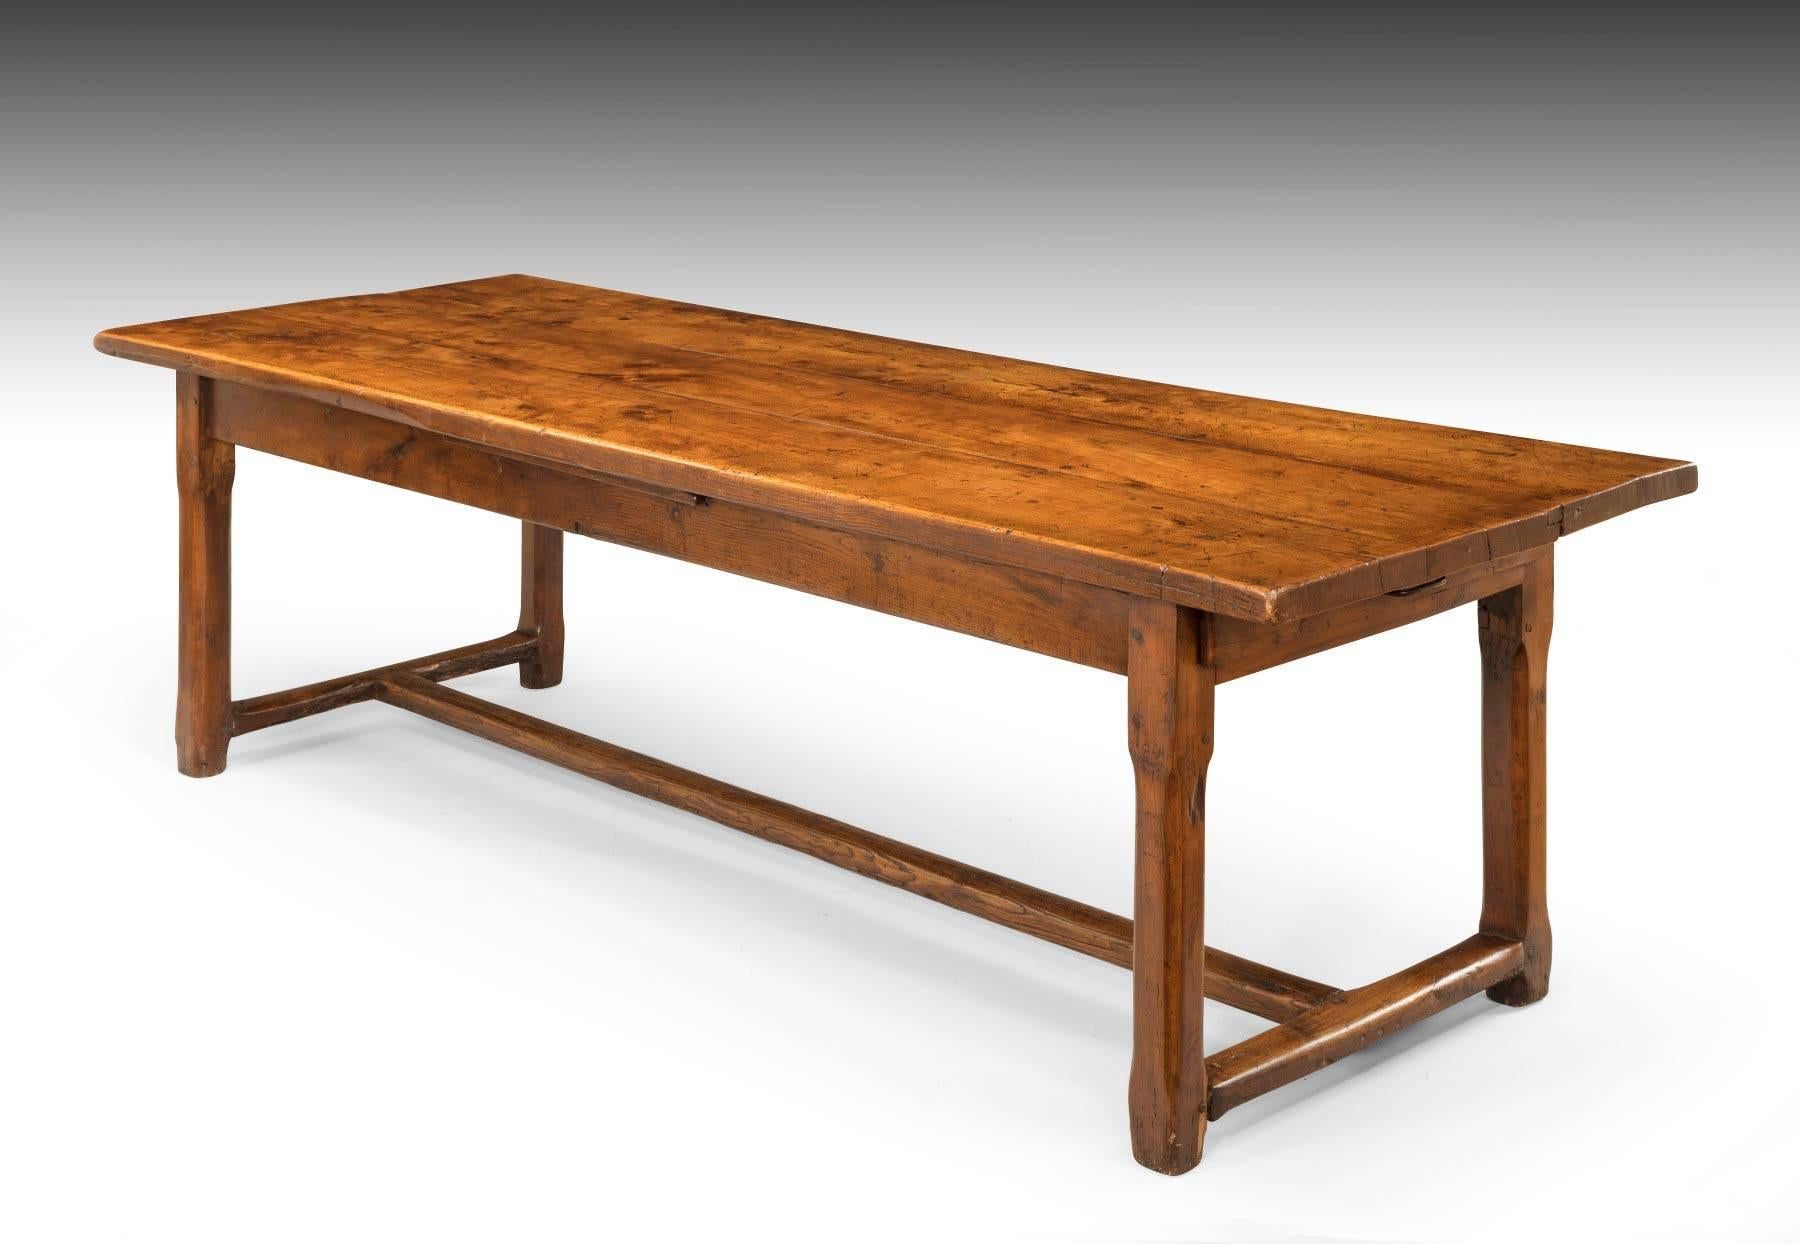 Of really great scale and with a thick planked top, this table has both drawers at each end and an unusual pull-out side serving slide. It is a really good color with super patination. A great table with great character! It is currently at our